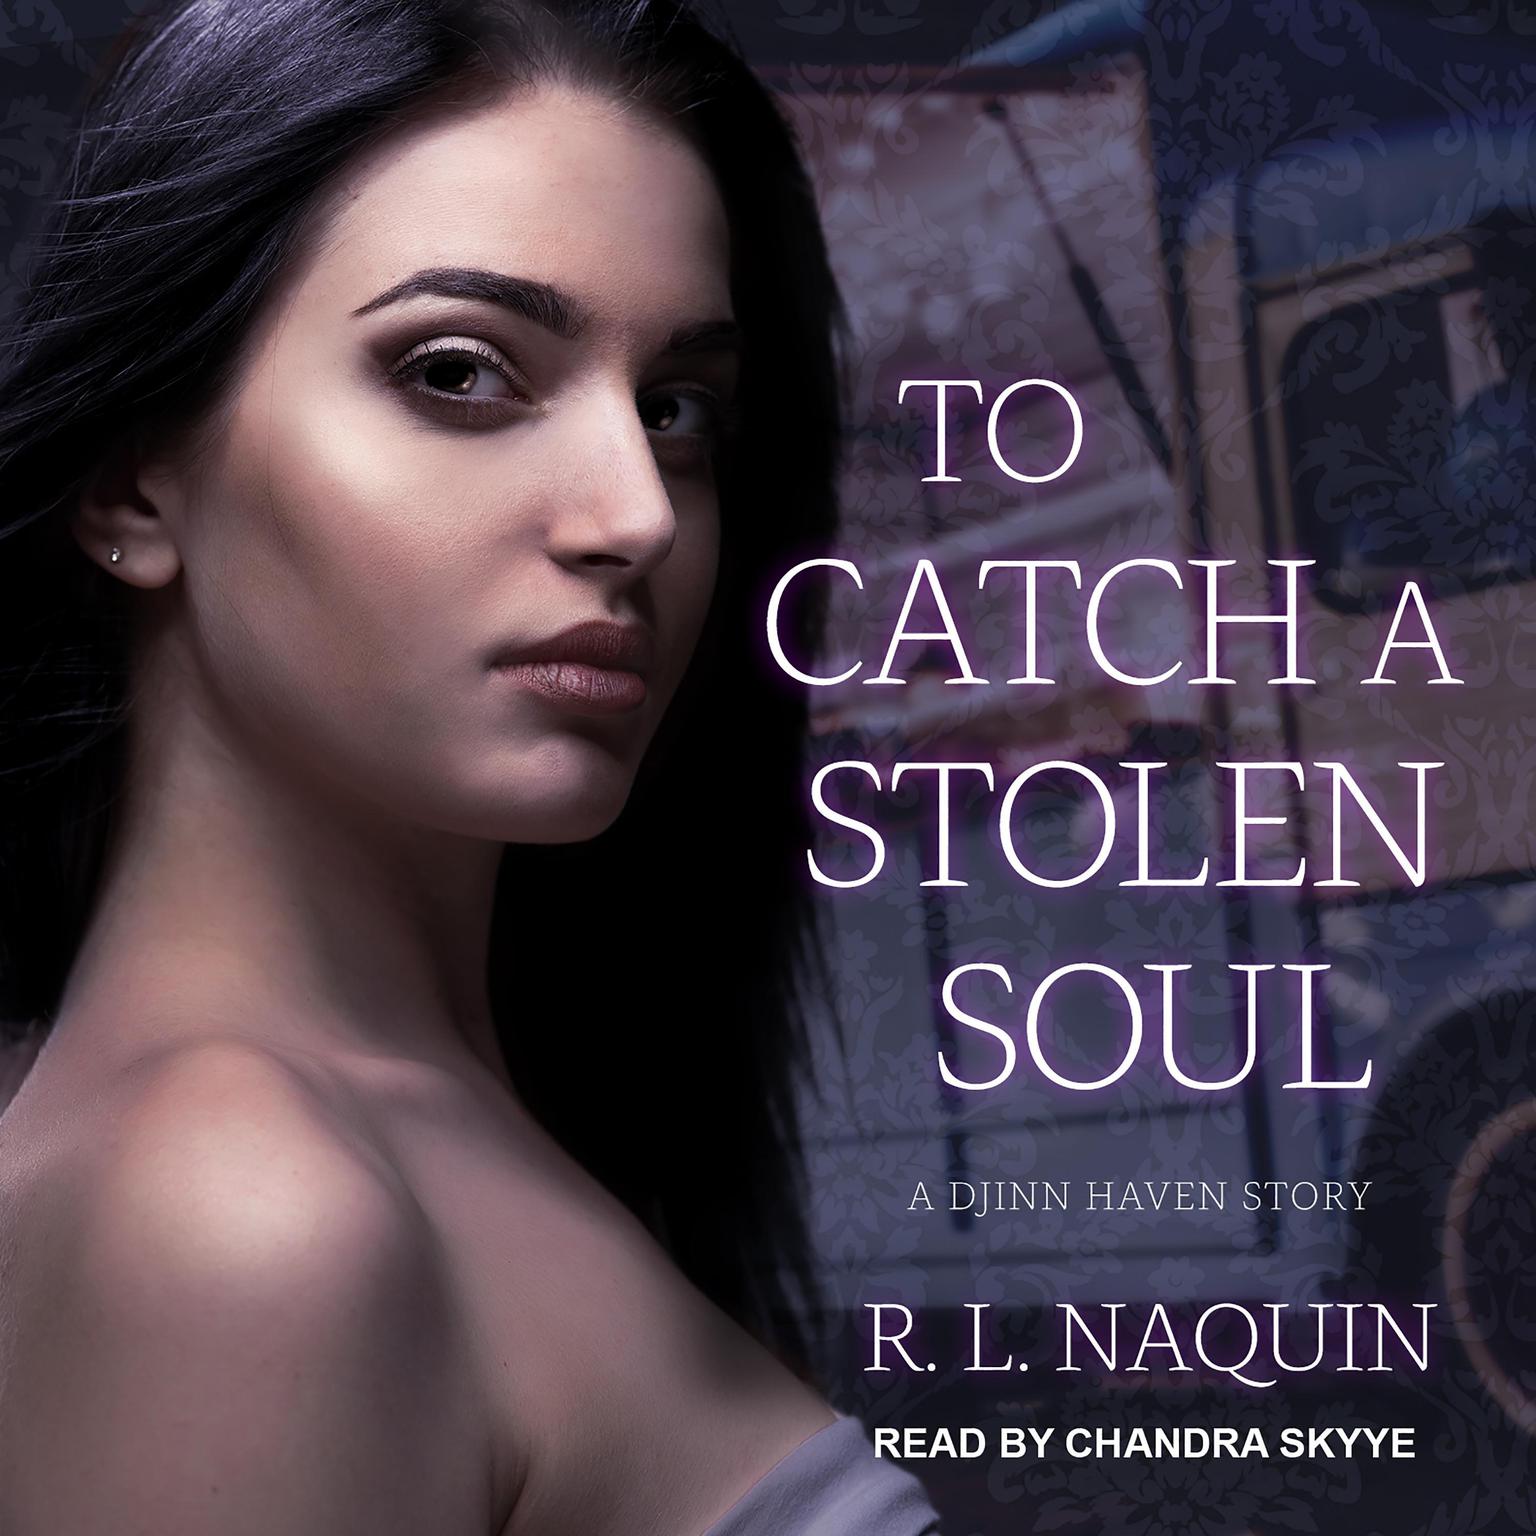 To Catch a Stolen Soul: A Humorous Urban Fantasy Novel Audiobook, by R. L. Naquin